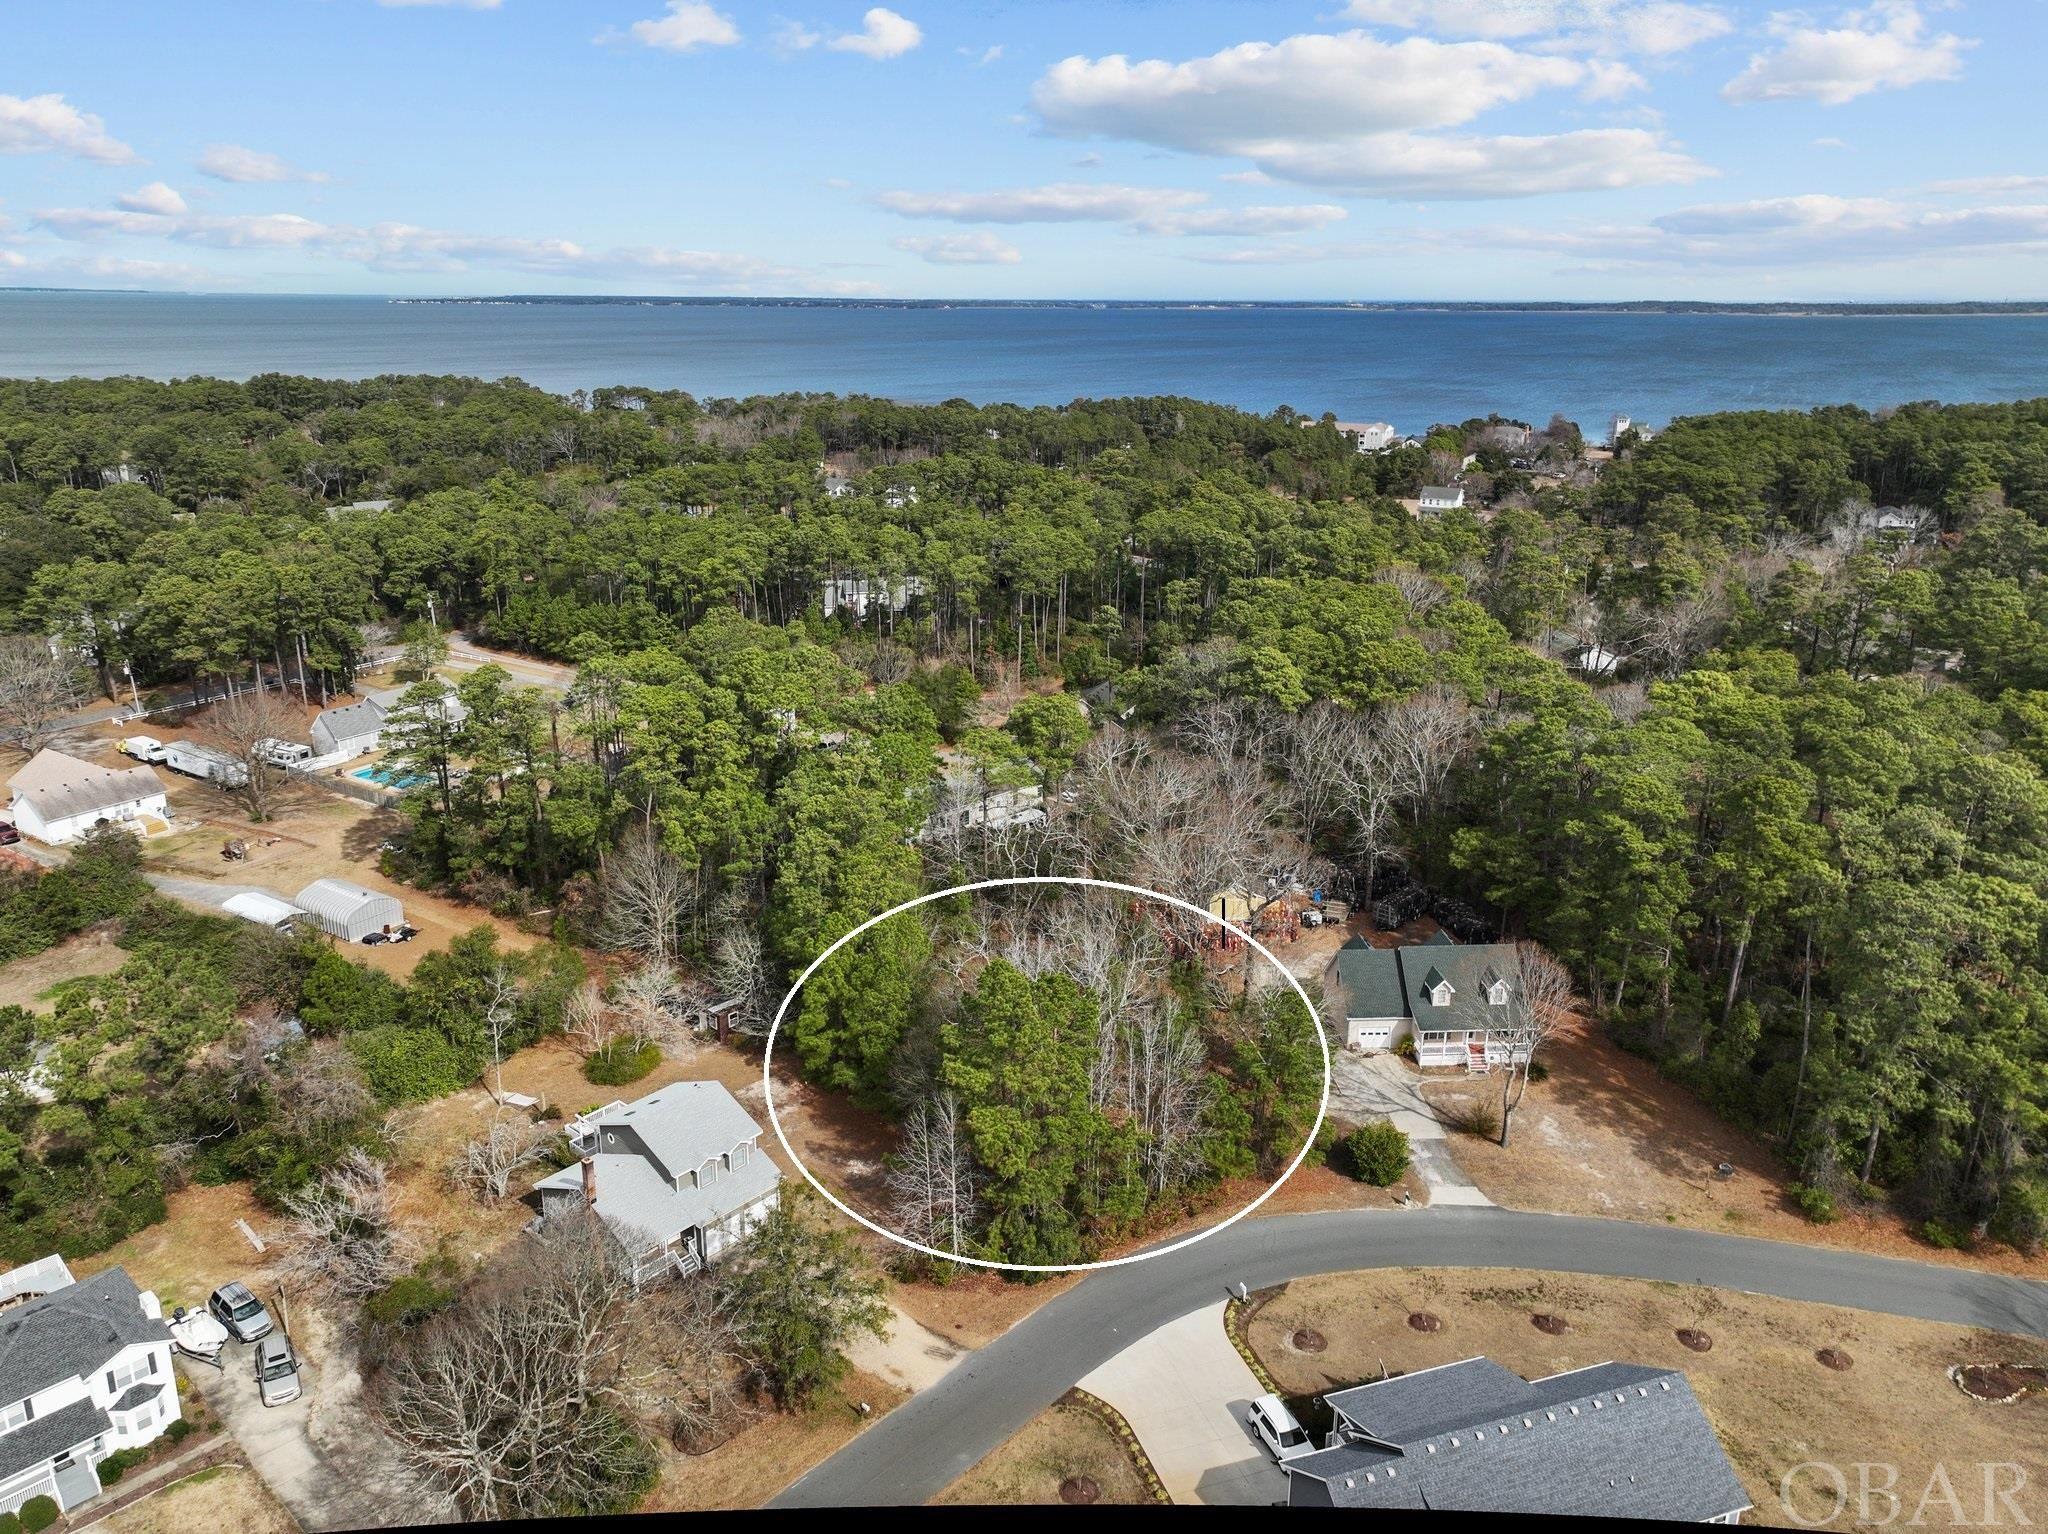 Design your own authentic home in the north end of Manteo.  Blend modern living with the raw nature of the Outer Banks.  Given the 22,000 square foot lot, ample room exists for both a stunning home and lush gardens.  Enjoy all of Manteo's hidden treasures!